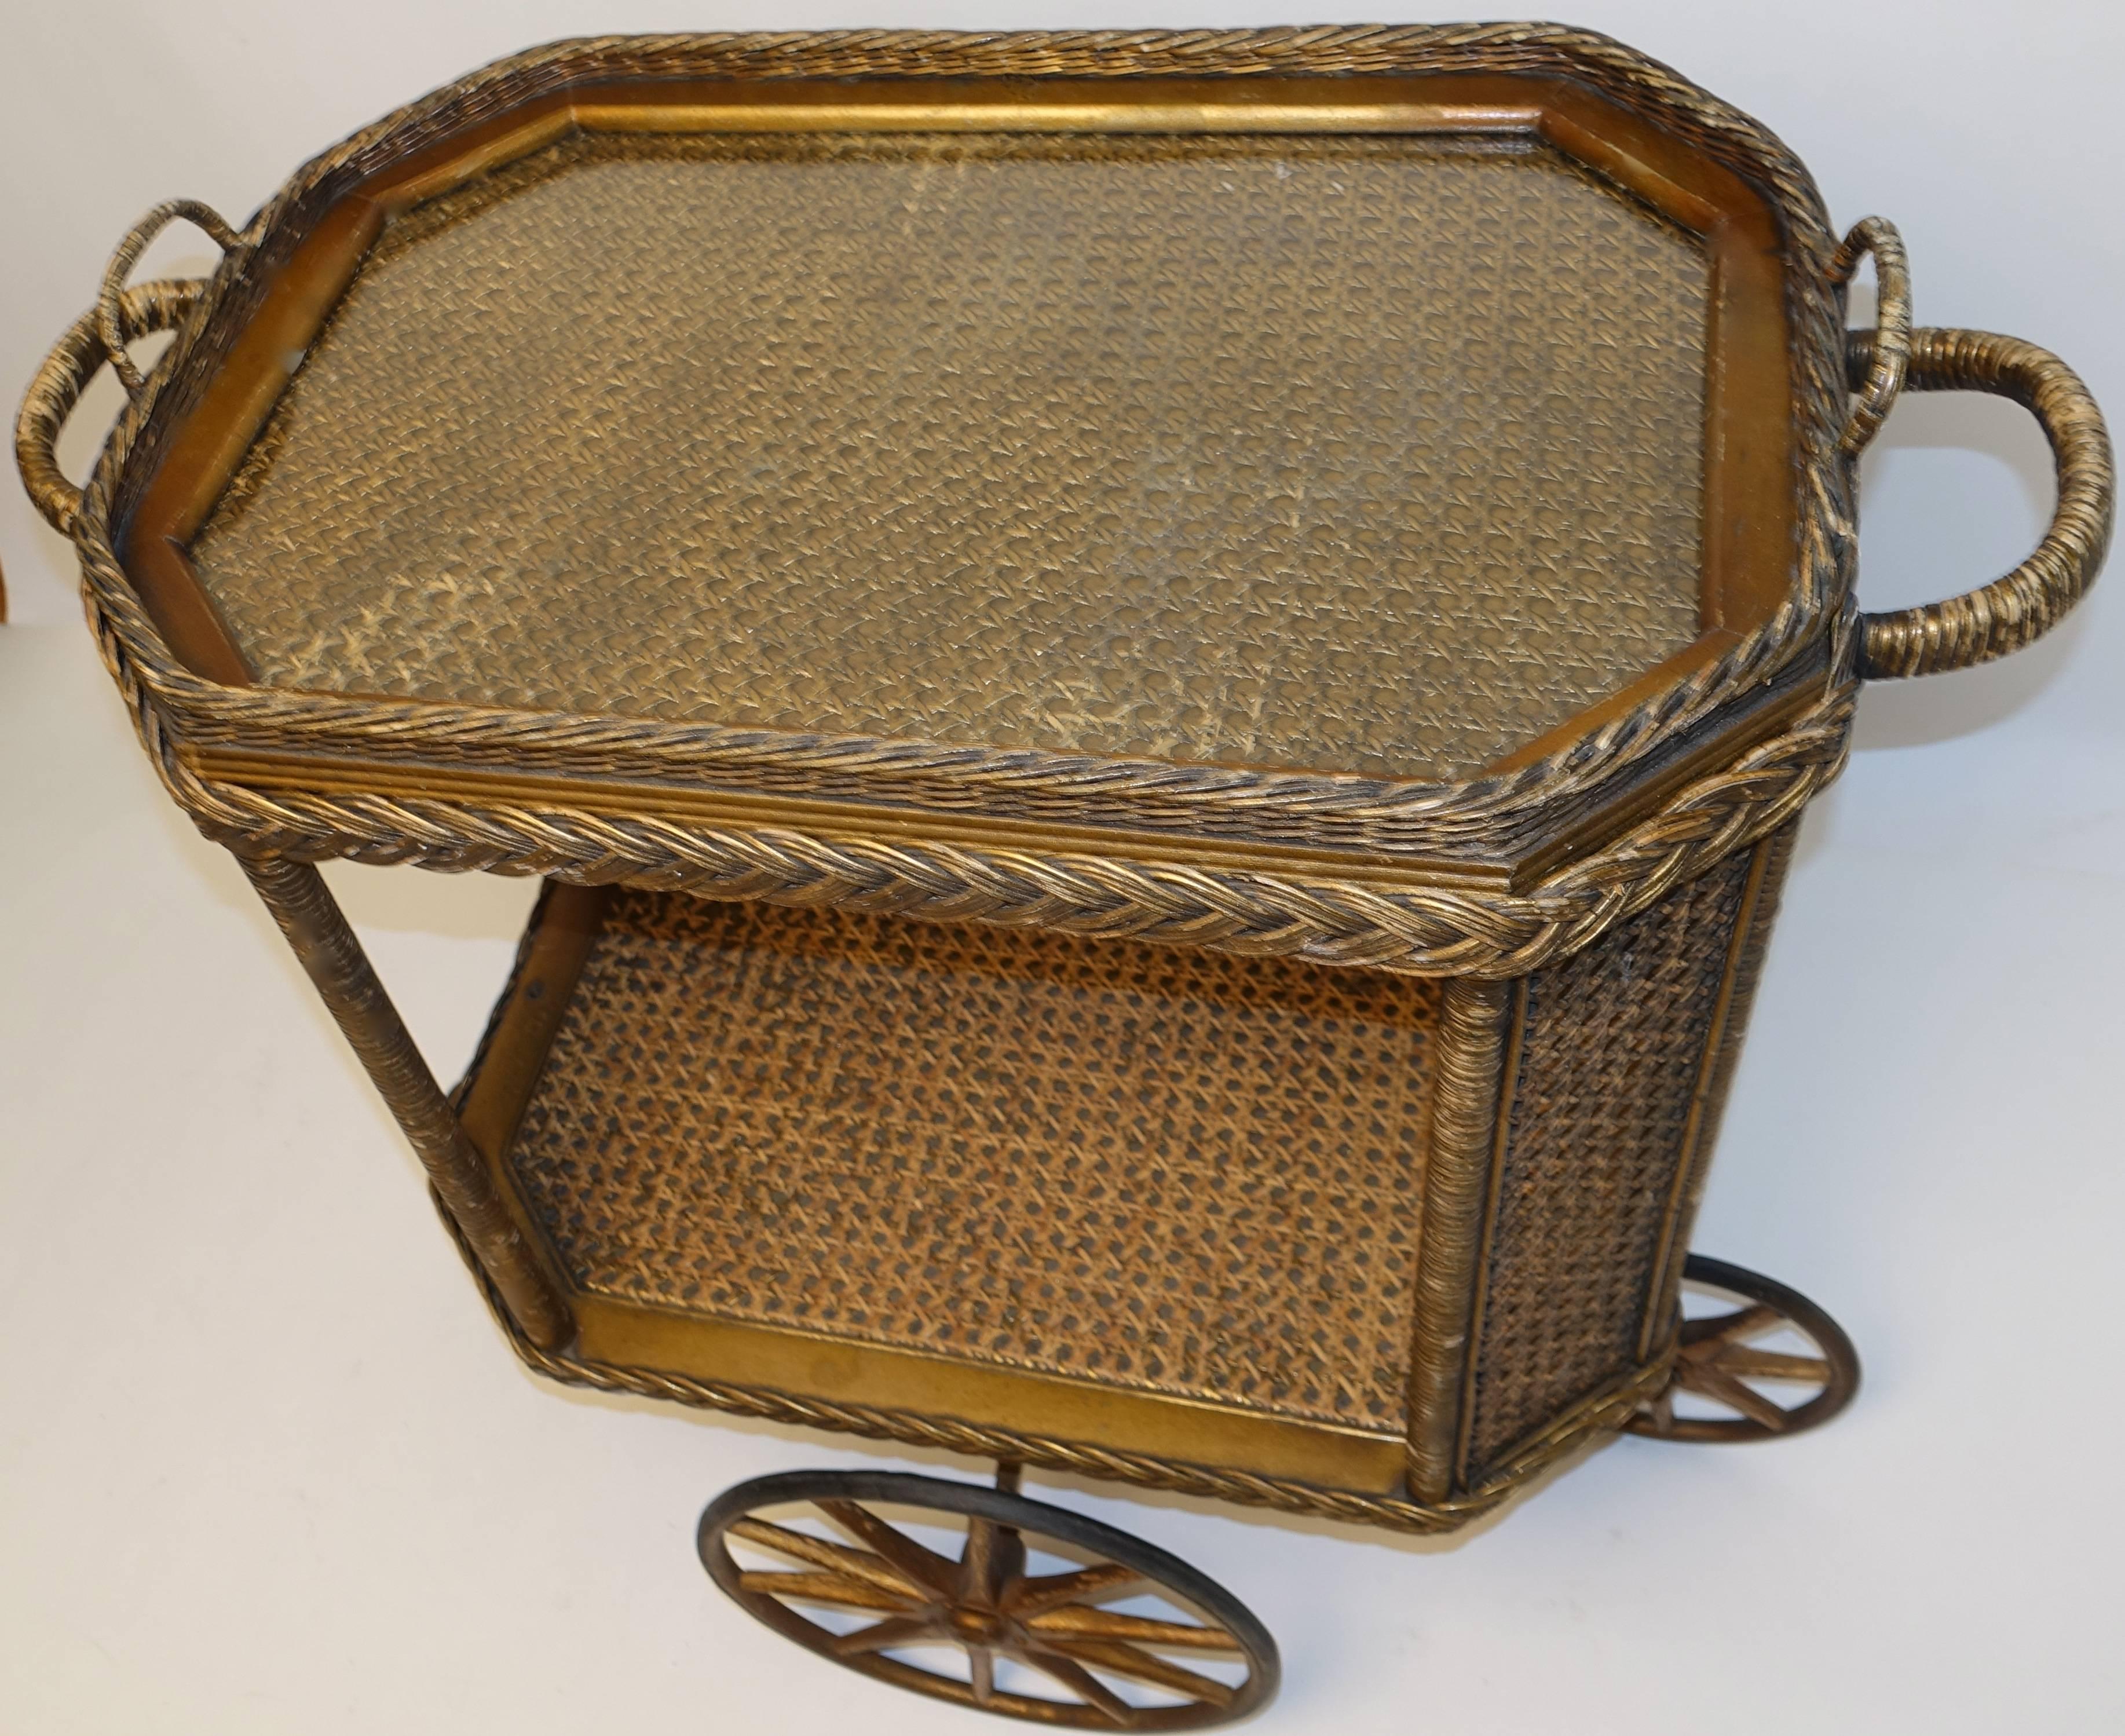 Original Heywood Bros. Wakefield Co. wicker and cane bar cart drinks cart with removable tray. The gold finish is original to the piece, all wheels are in working order the front and rear wheels allow the cart to turn in a 360 degrees.
Paper label